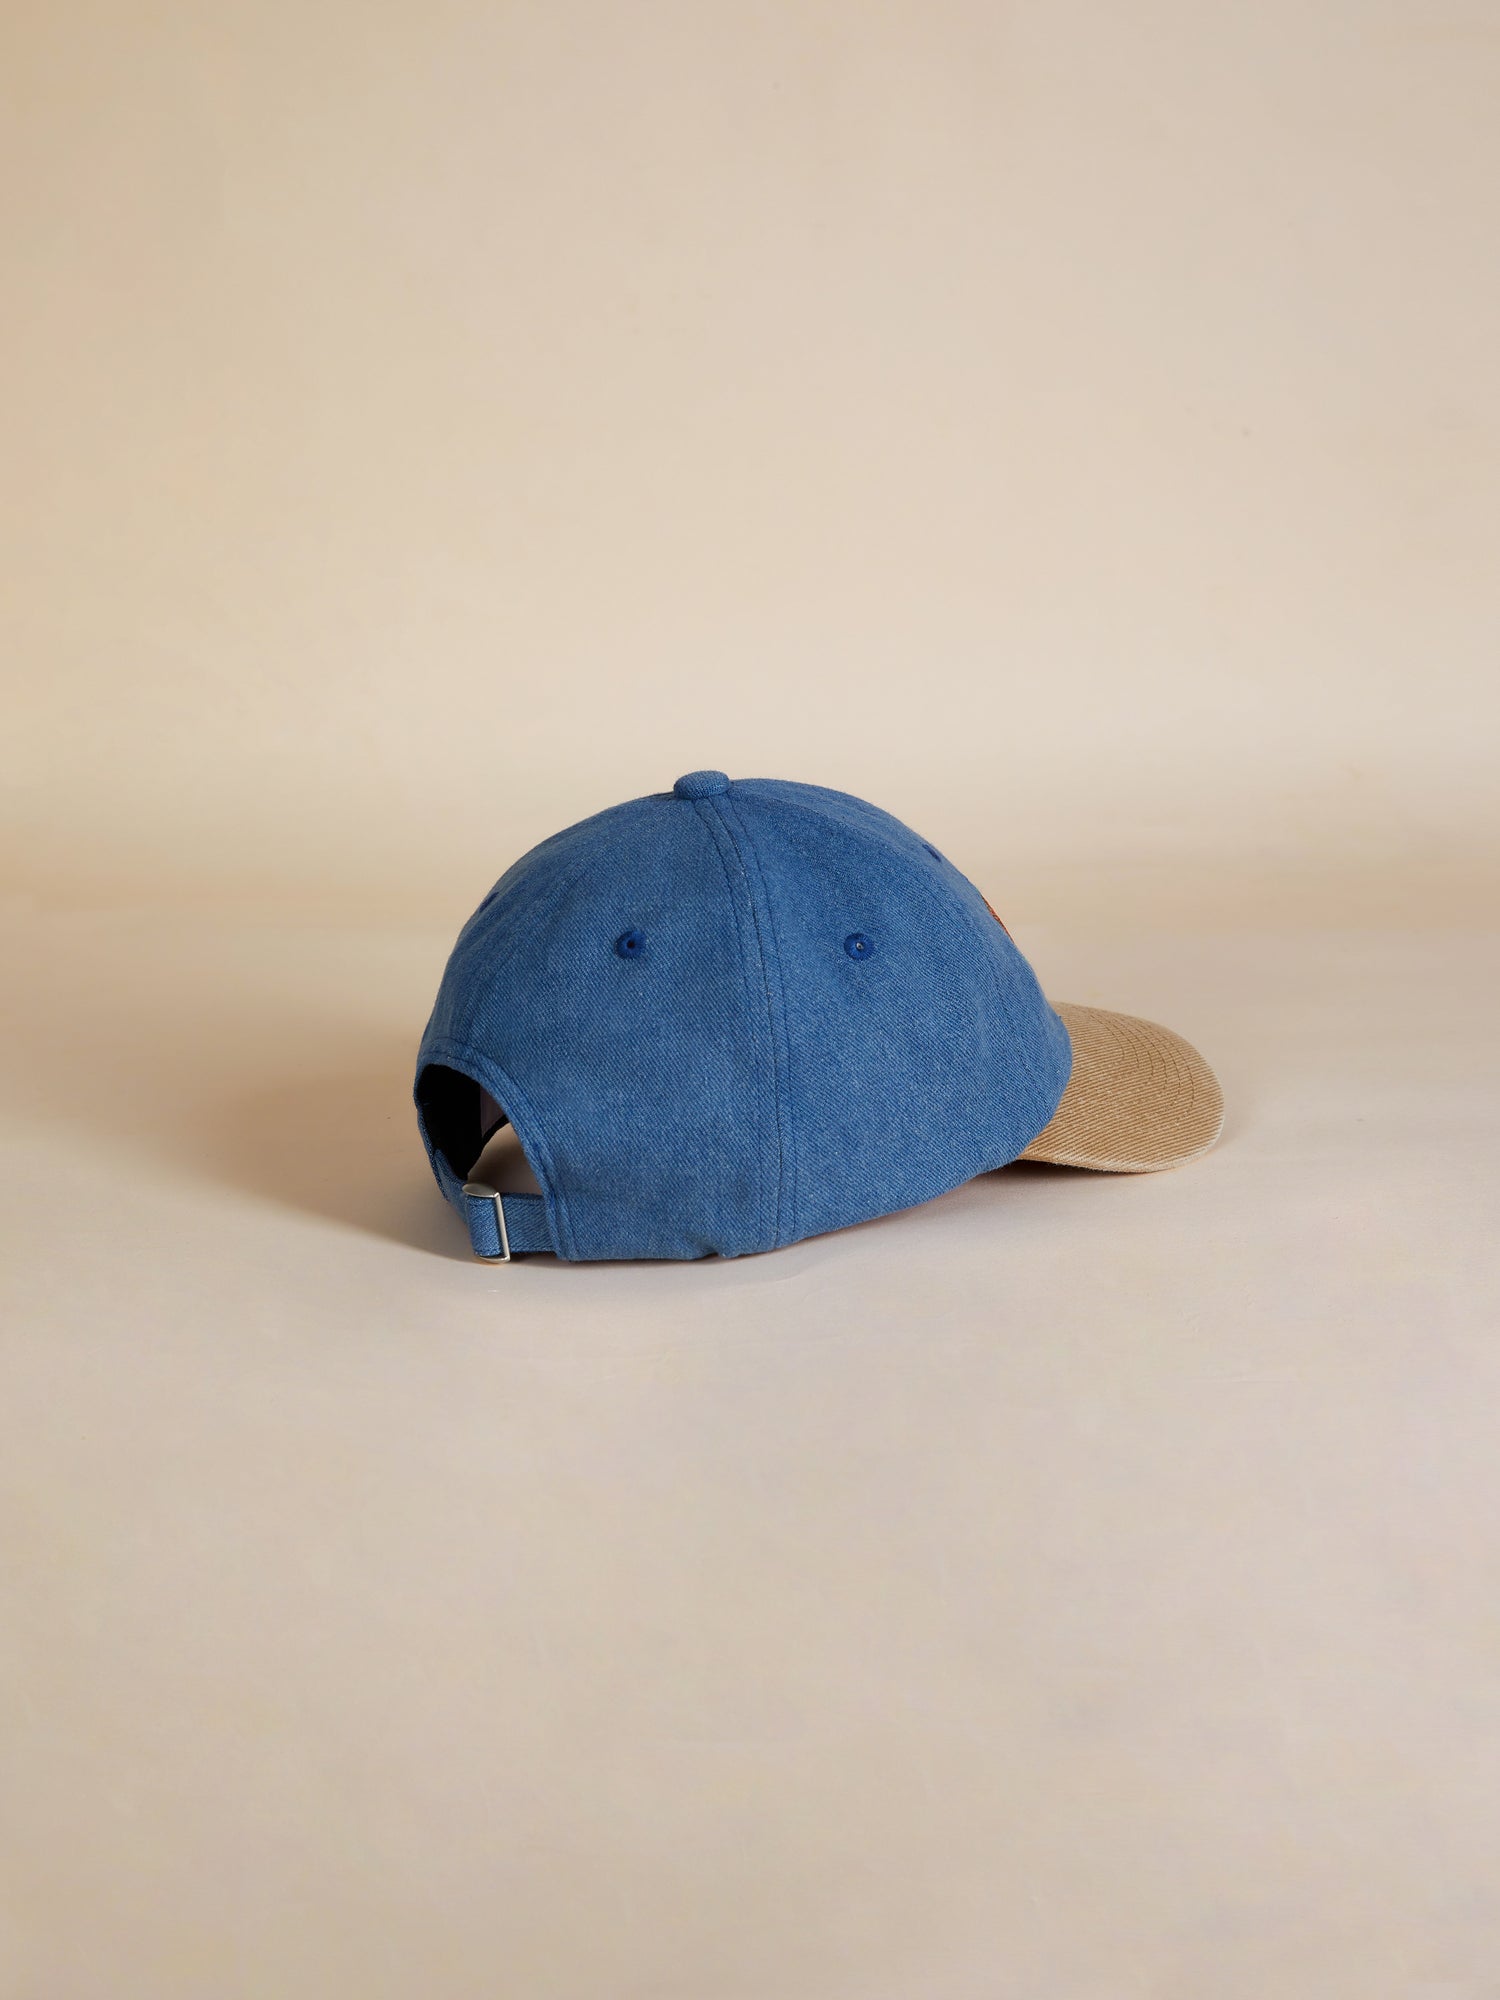 A Found Butterfly House Denim Cap on a beige background.